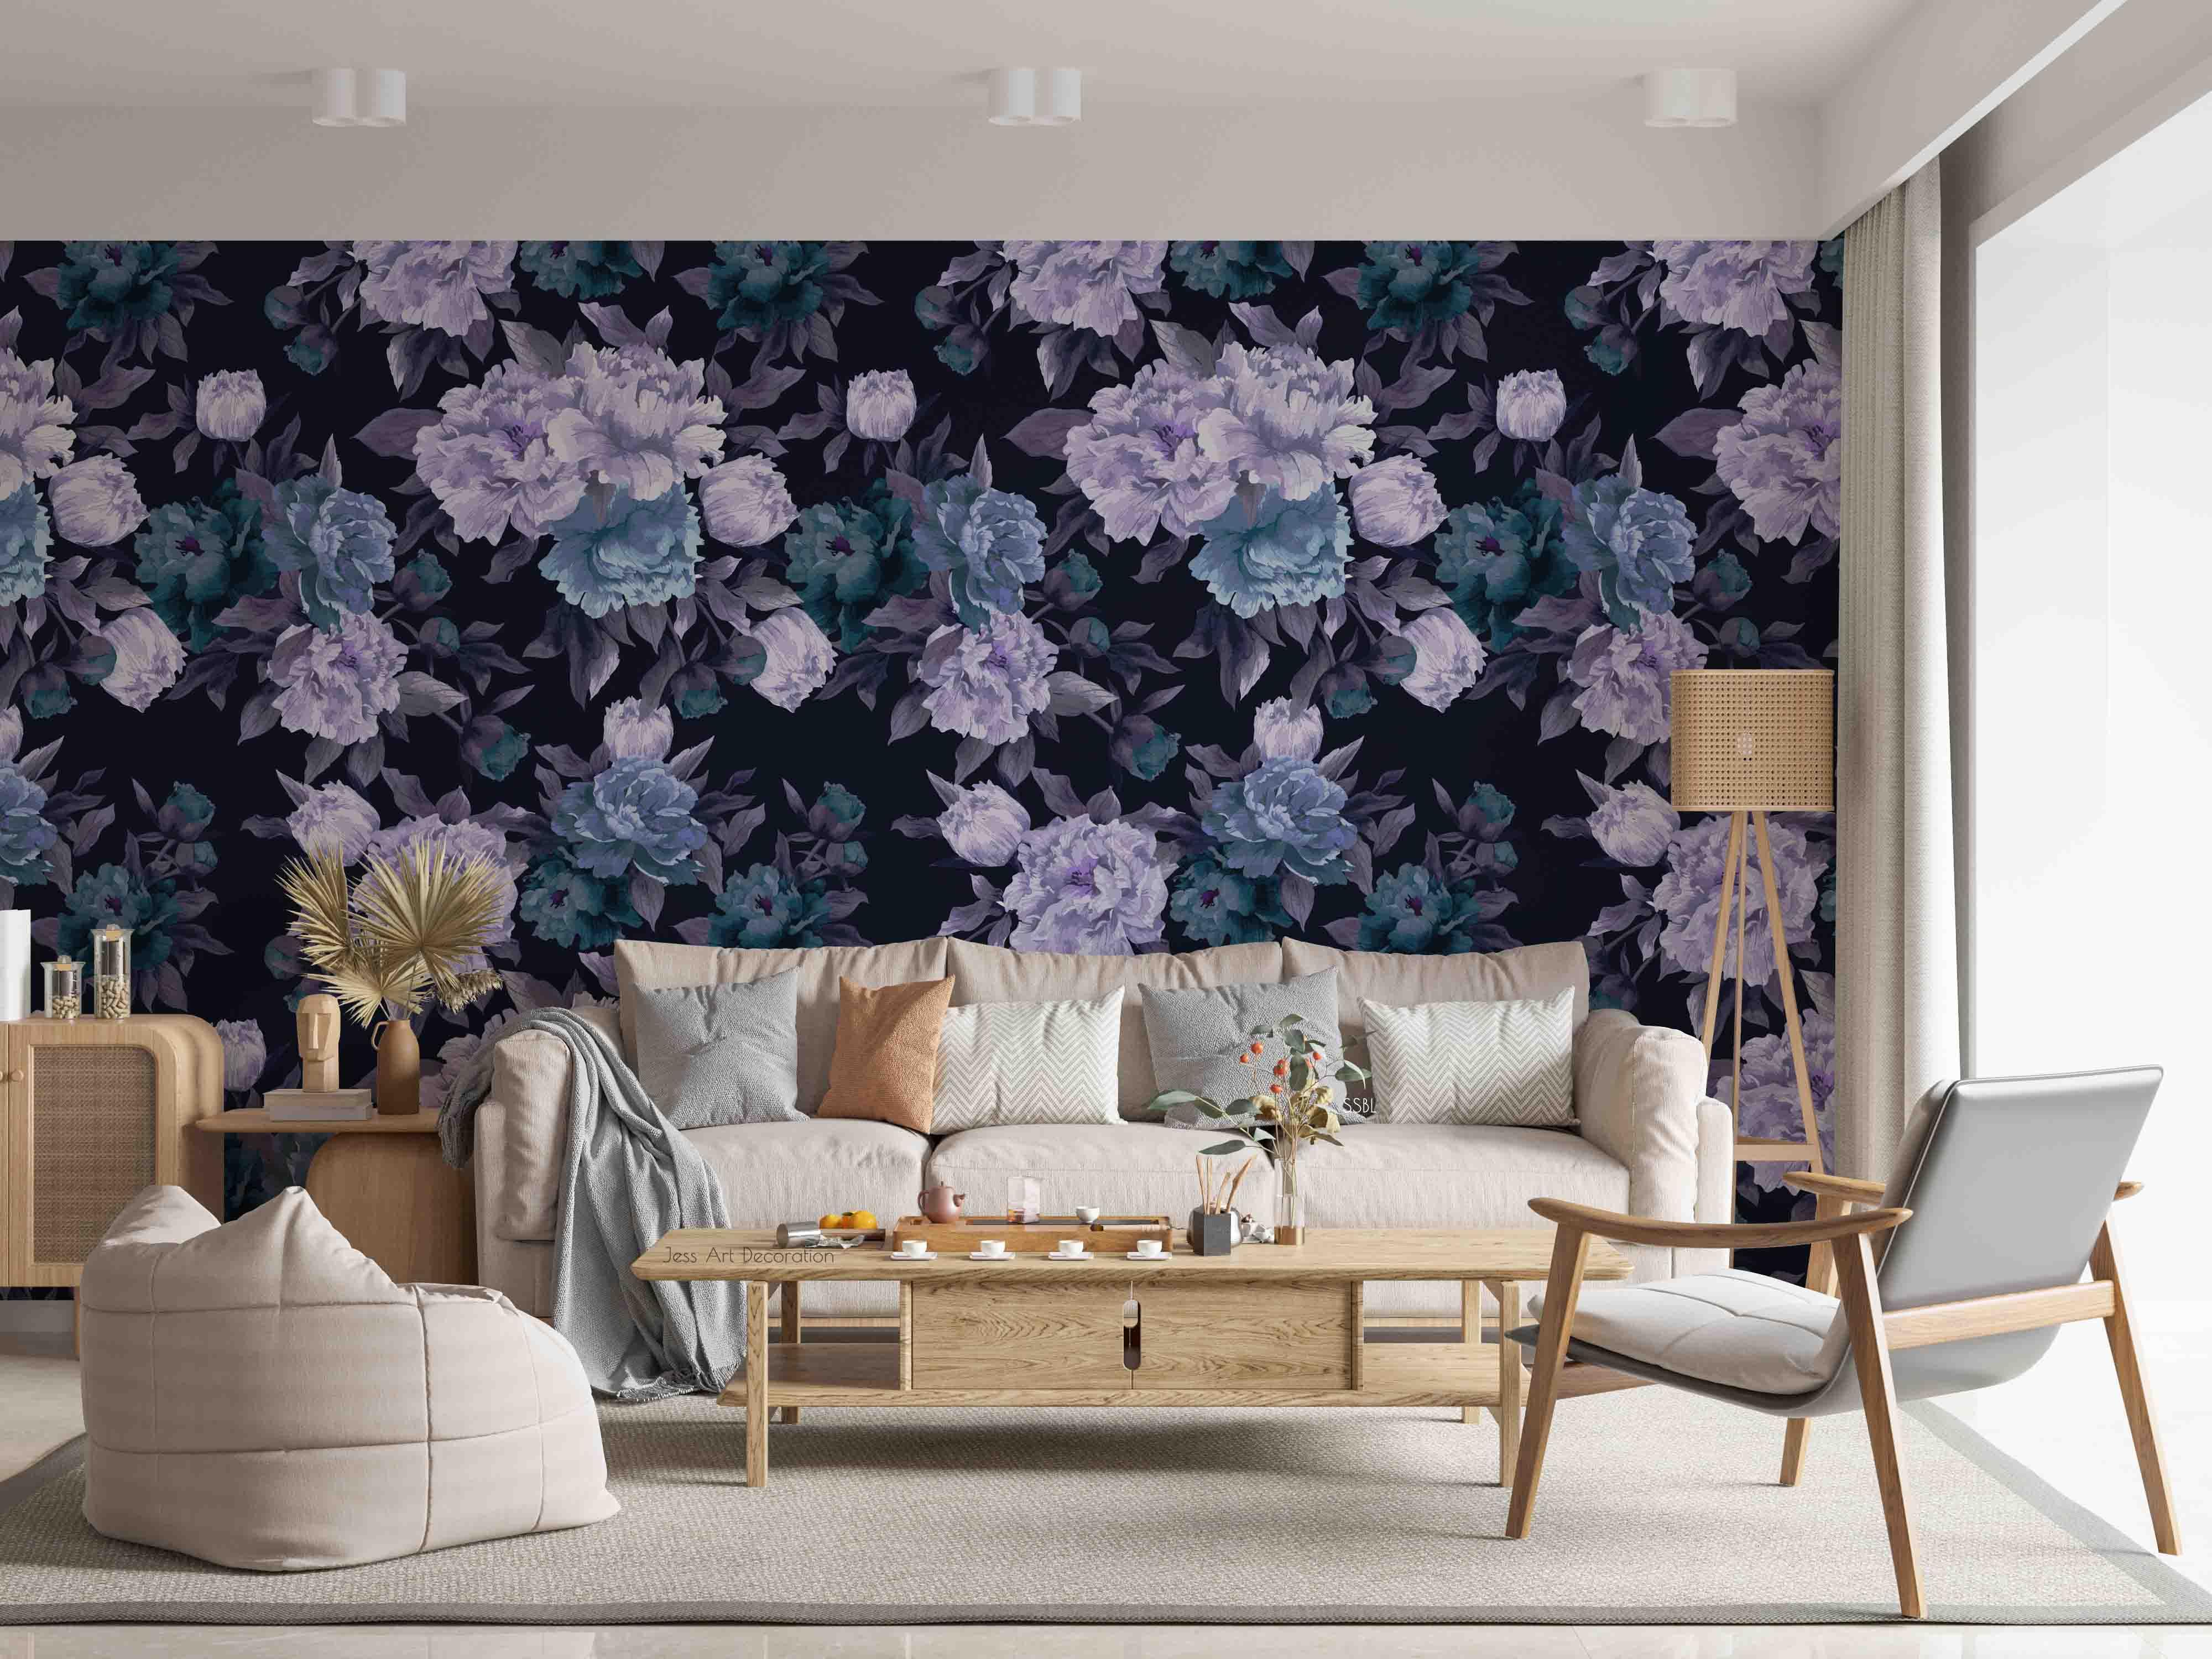 3D Vintage Baroque Art Blooming Peony Black Background Wall Mural Wallpaper GD 3642- Jess Art Decoration